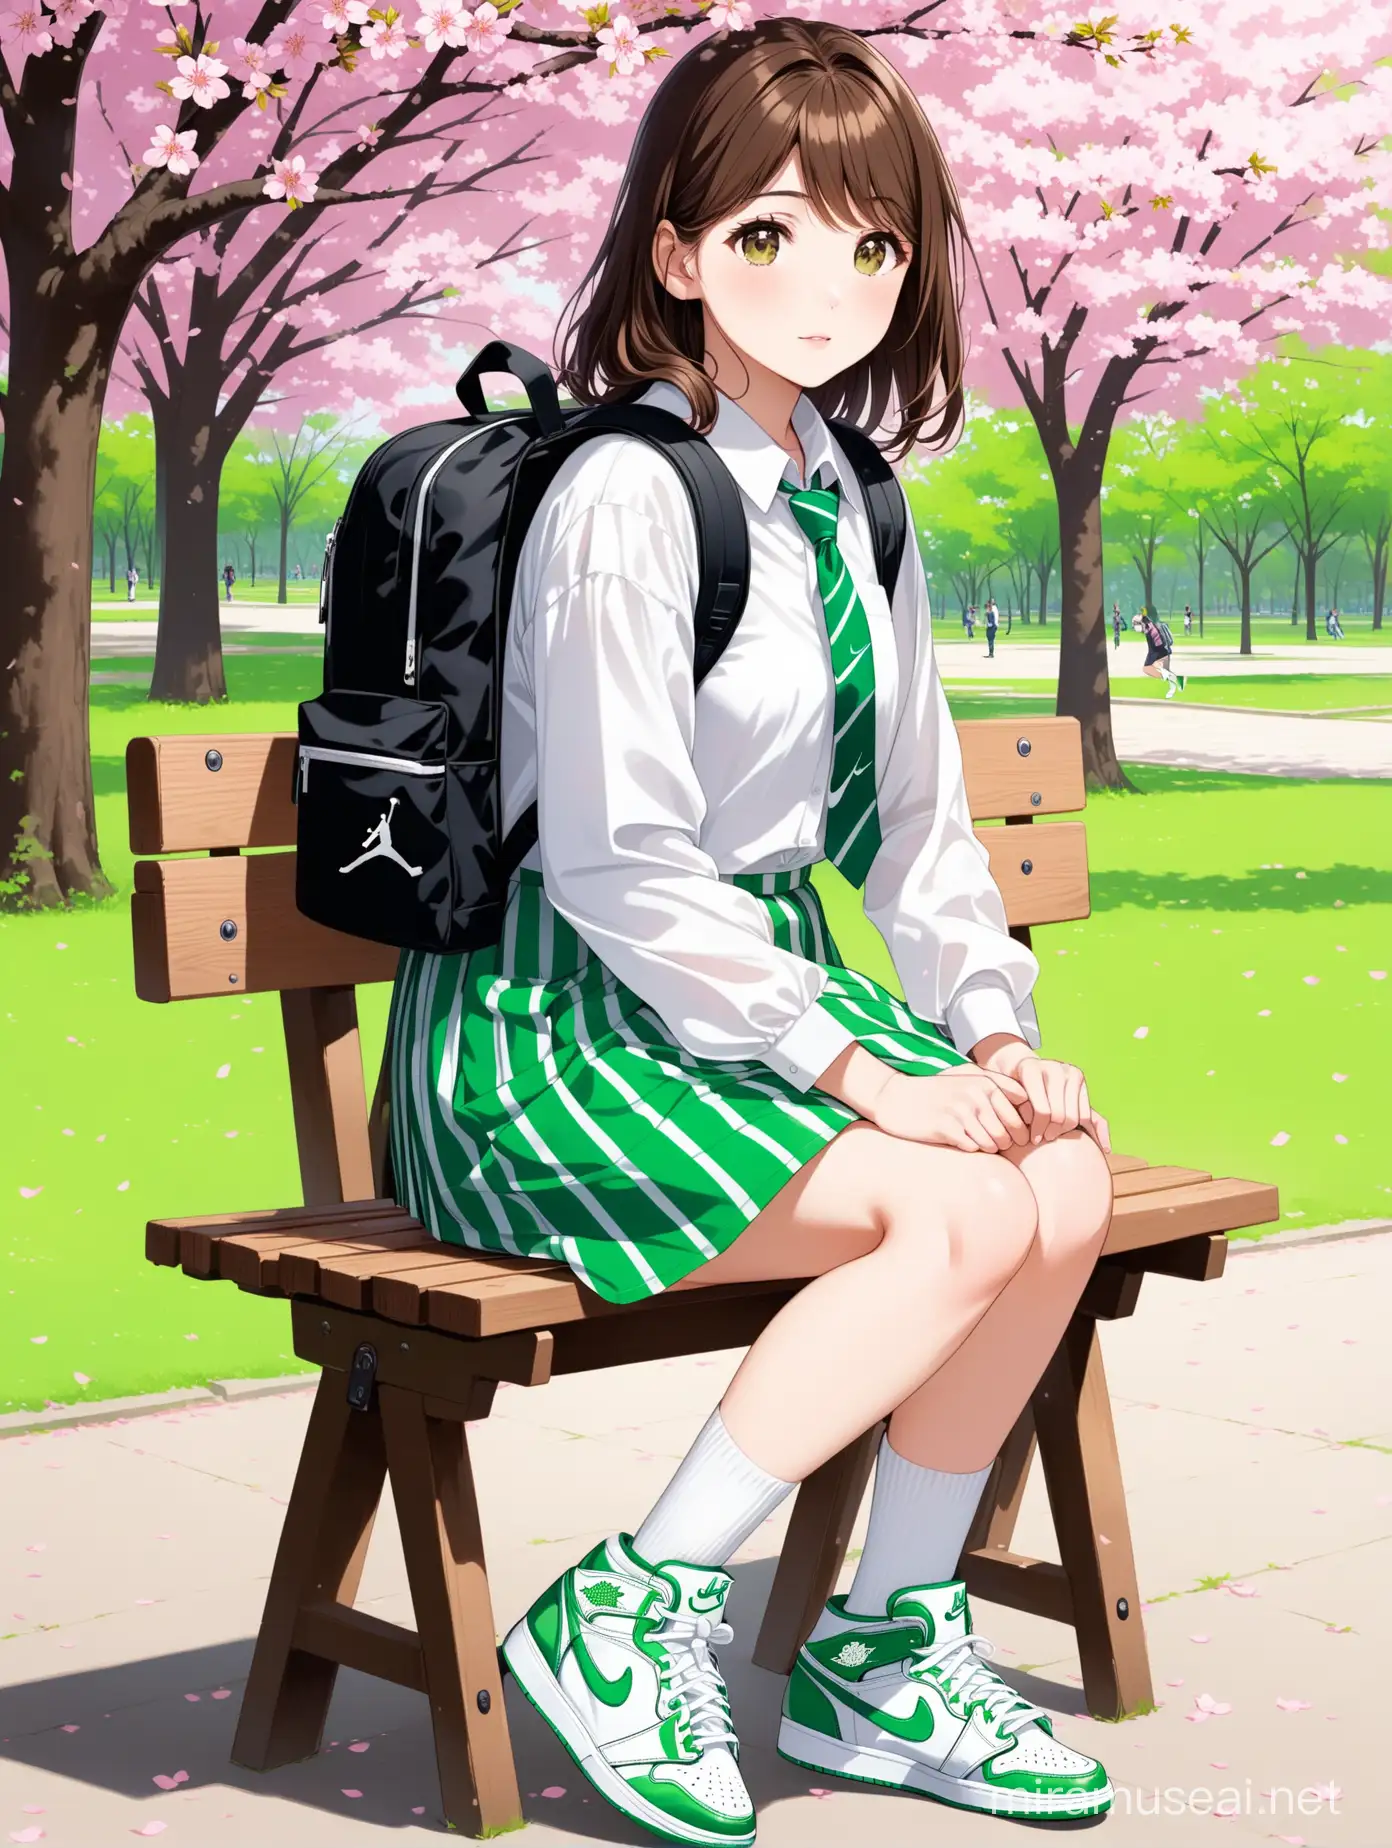 A young woman with small brown eyes, medium length brown hair, wearing a white shirt, green striped skirt, and green tie, she is sitting on a wooden chair in a park with sakura trees in the background ,Long white socks, green Nike Air Jordan shoes, and carrying a black school backpack.